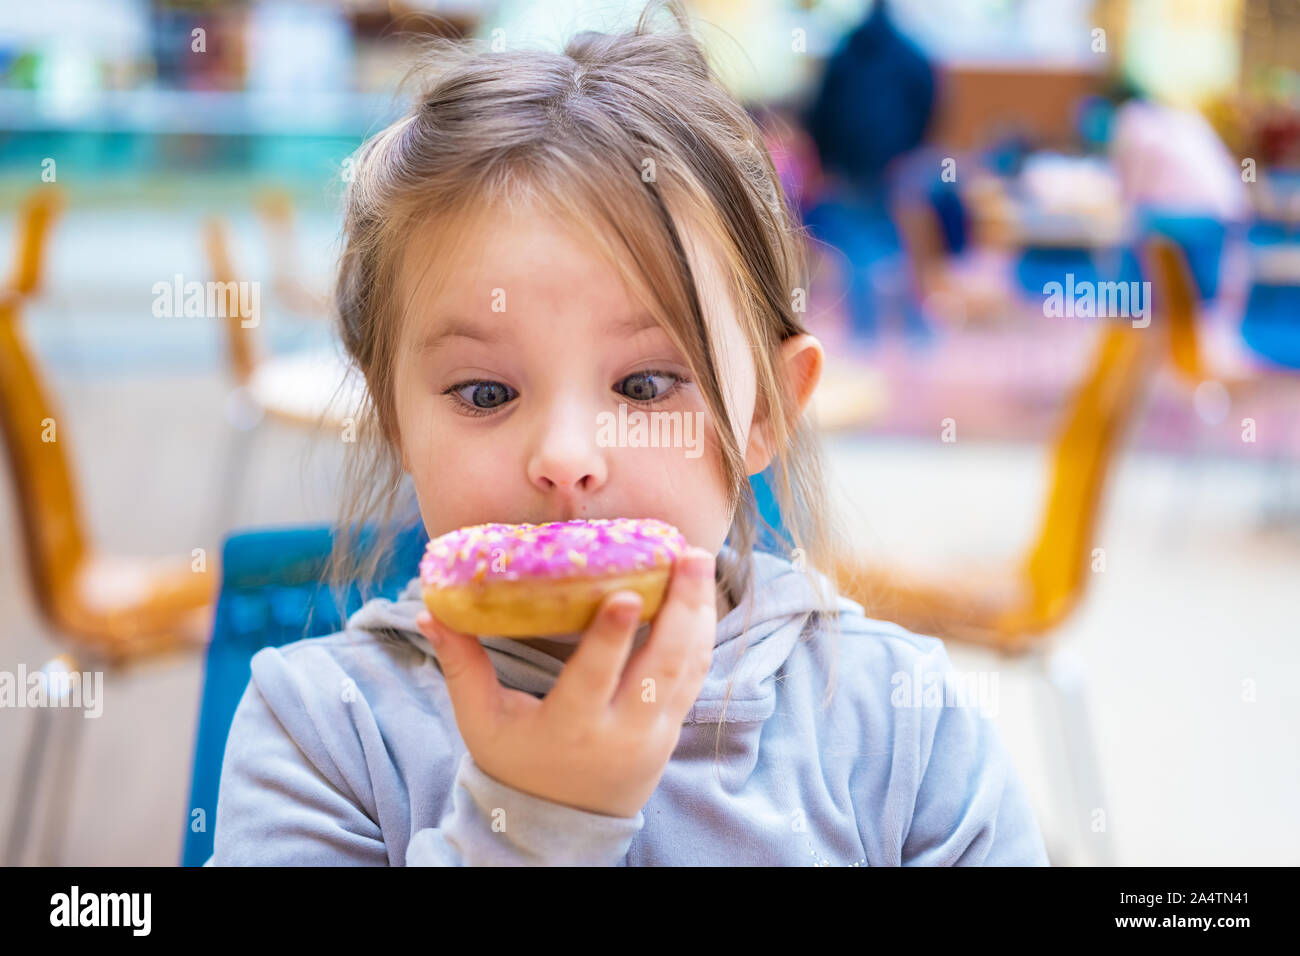 Cute girl eating a donut in a cafe. Funny portrait of a child Stock Photo